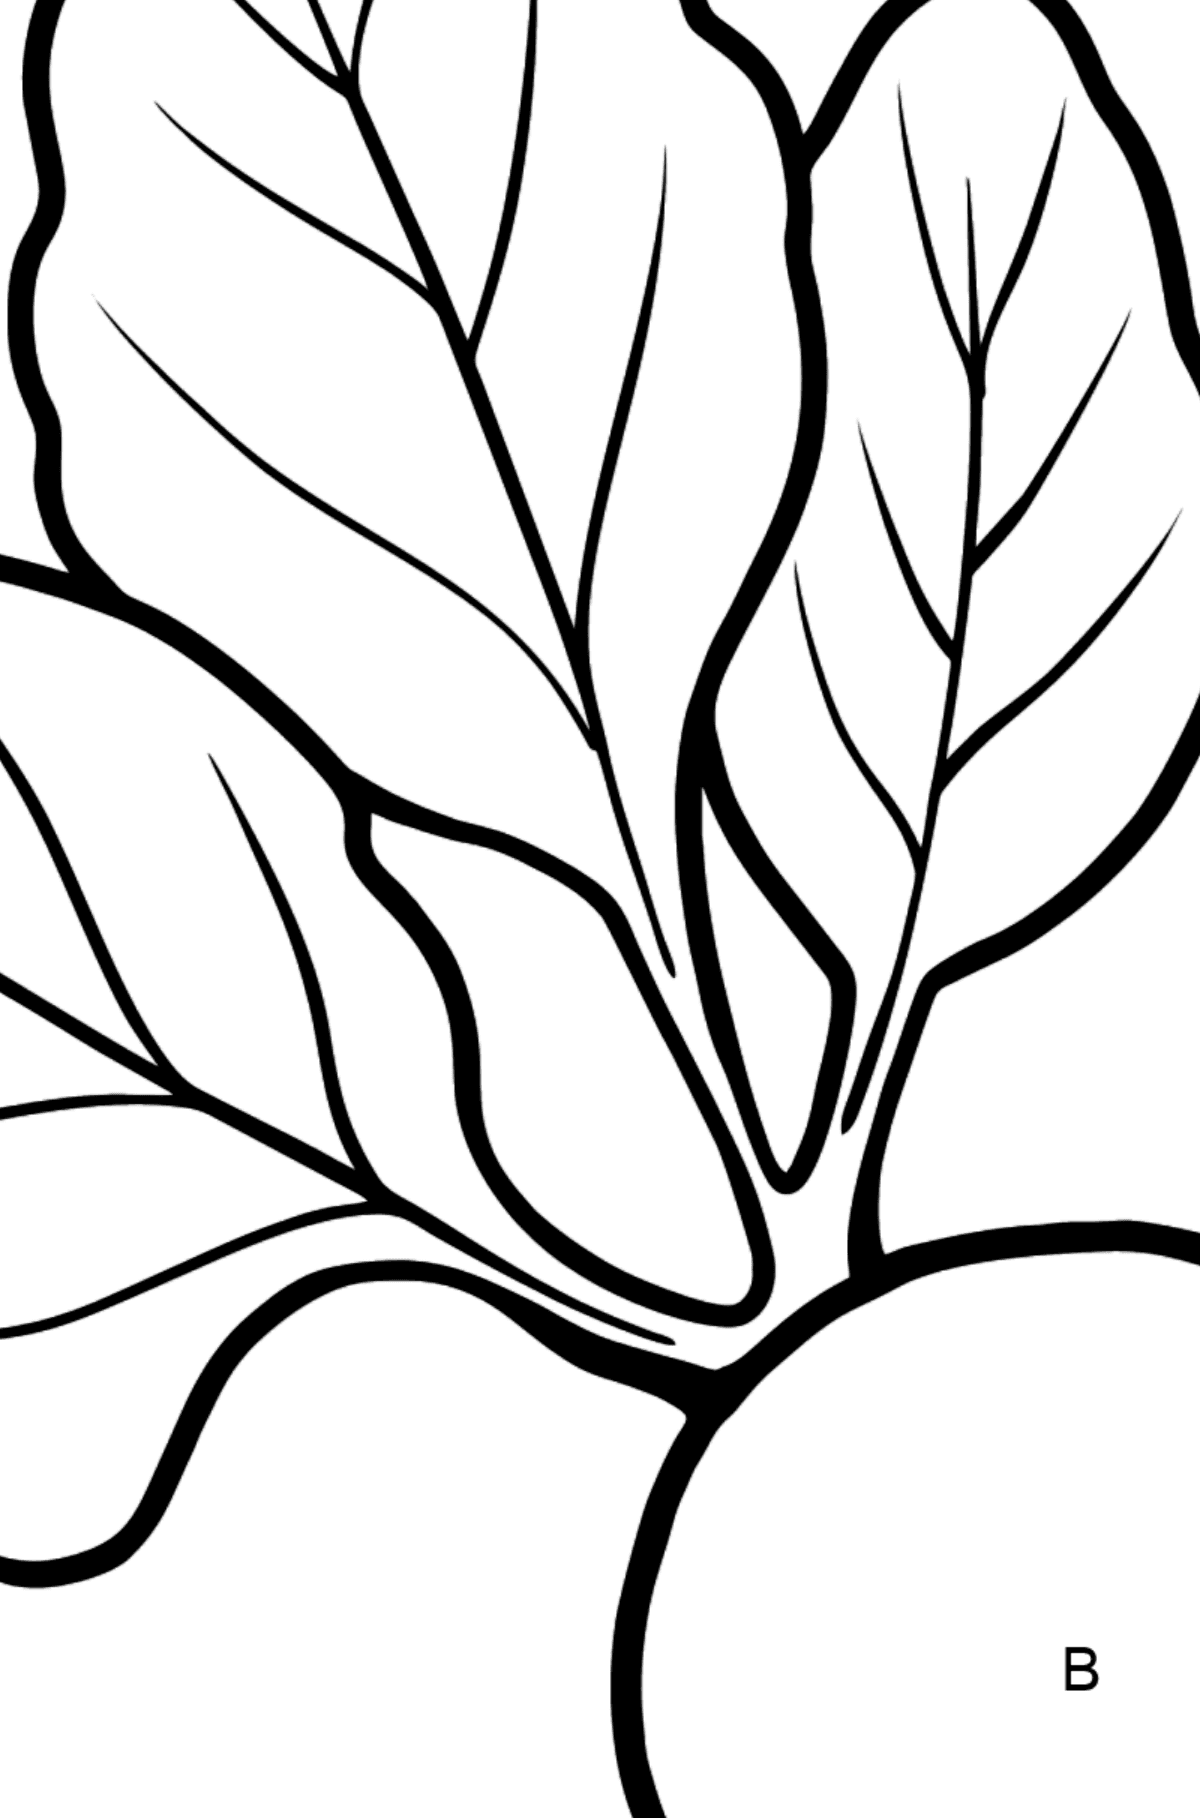 Beet coloring page - Coloring by Letters for Kids